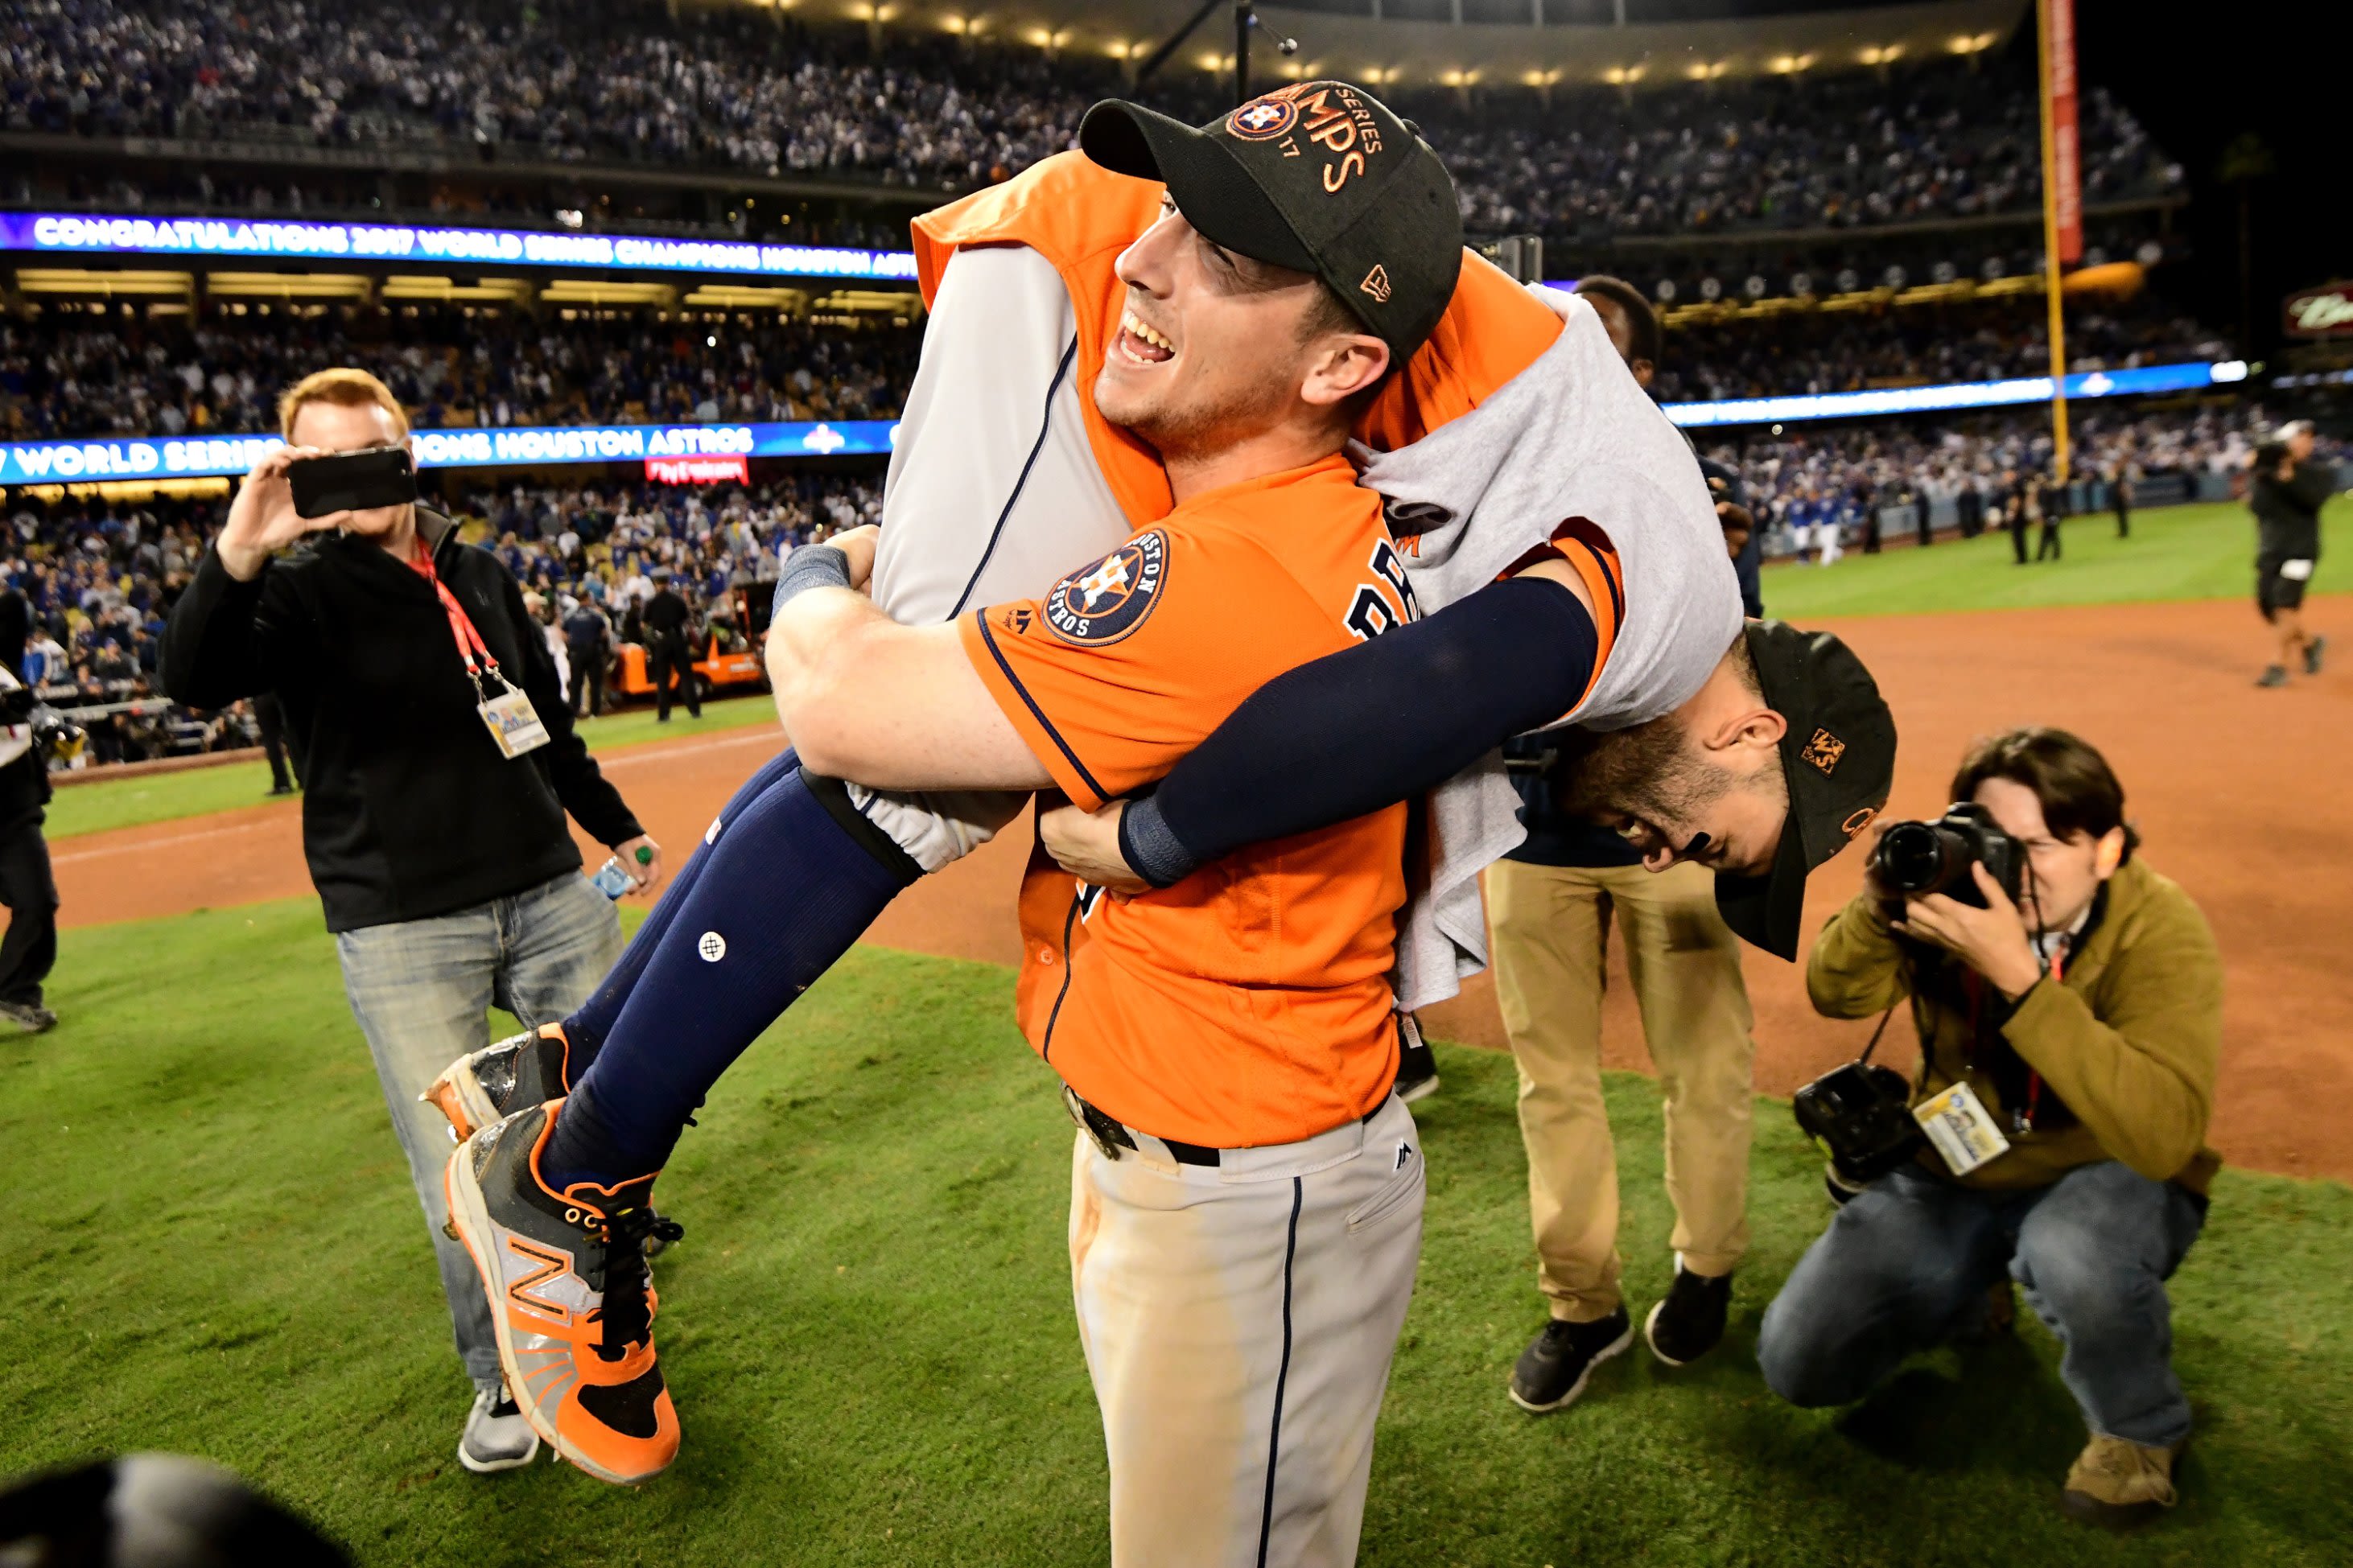 Sports Illustrated cover declares Houston Astros '2017 World